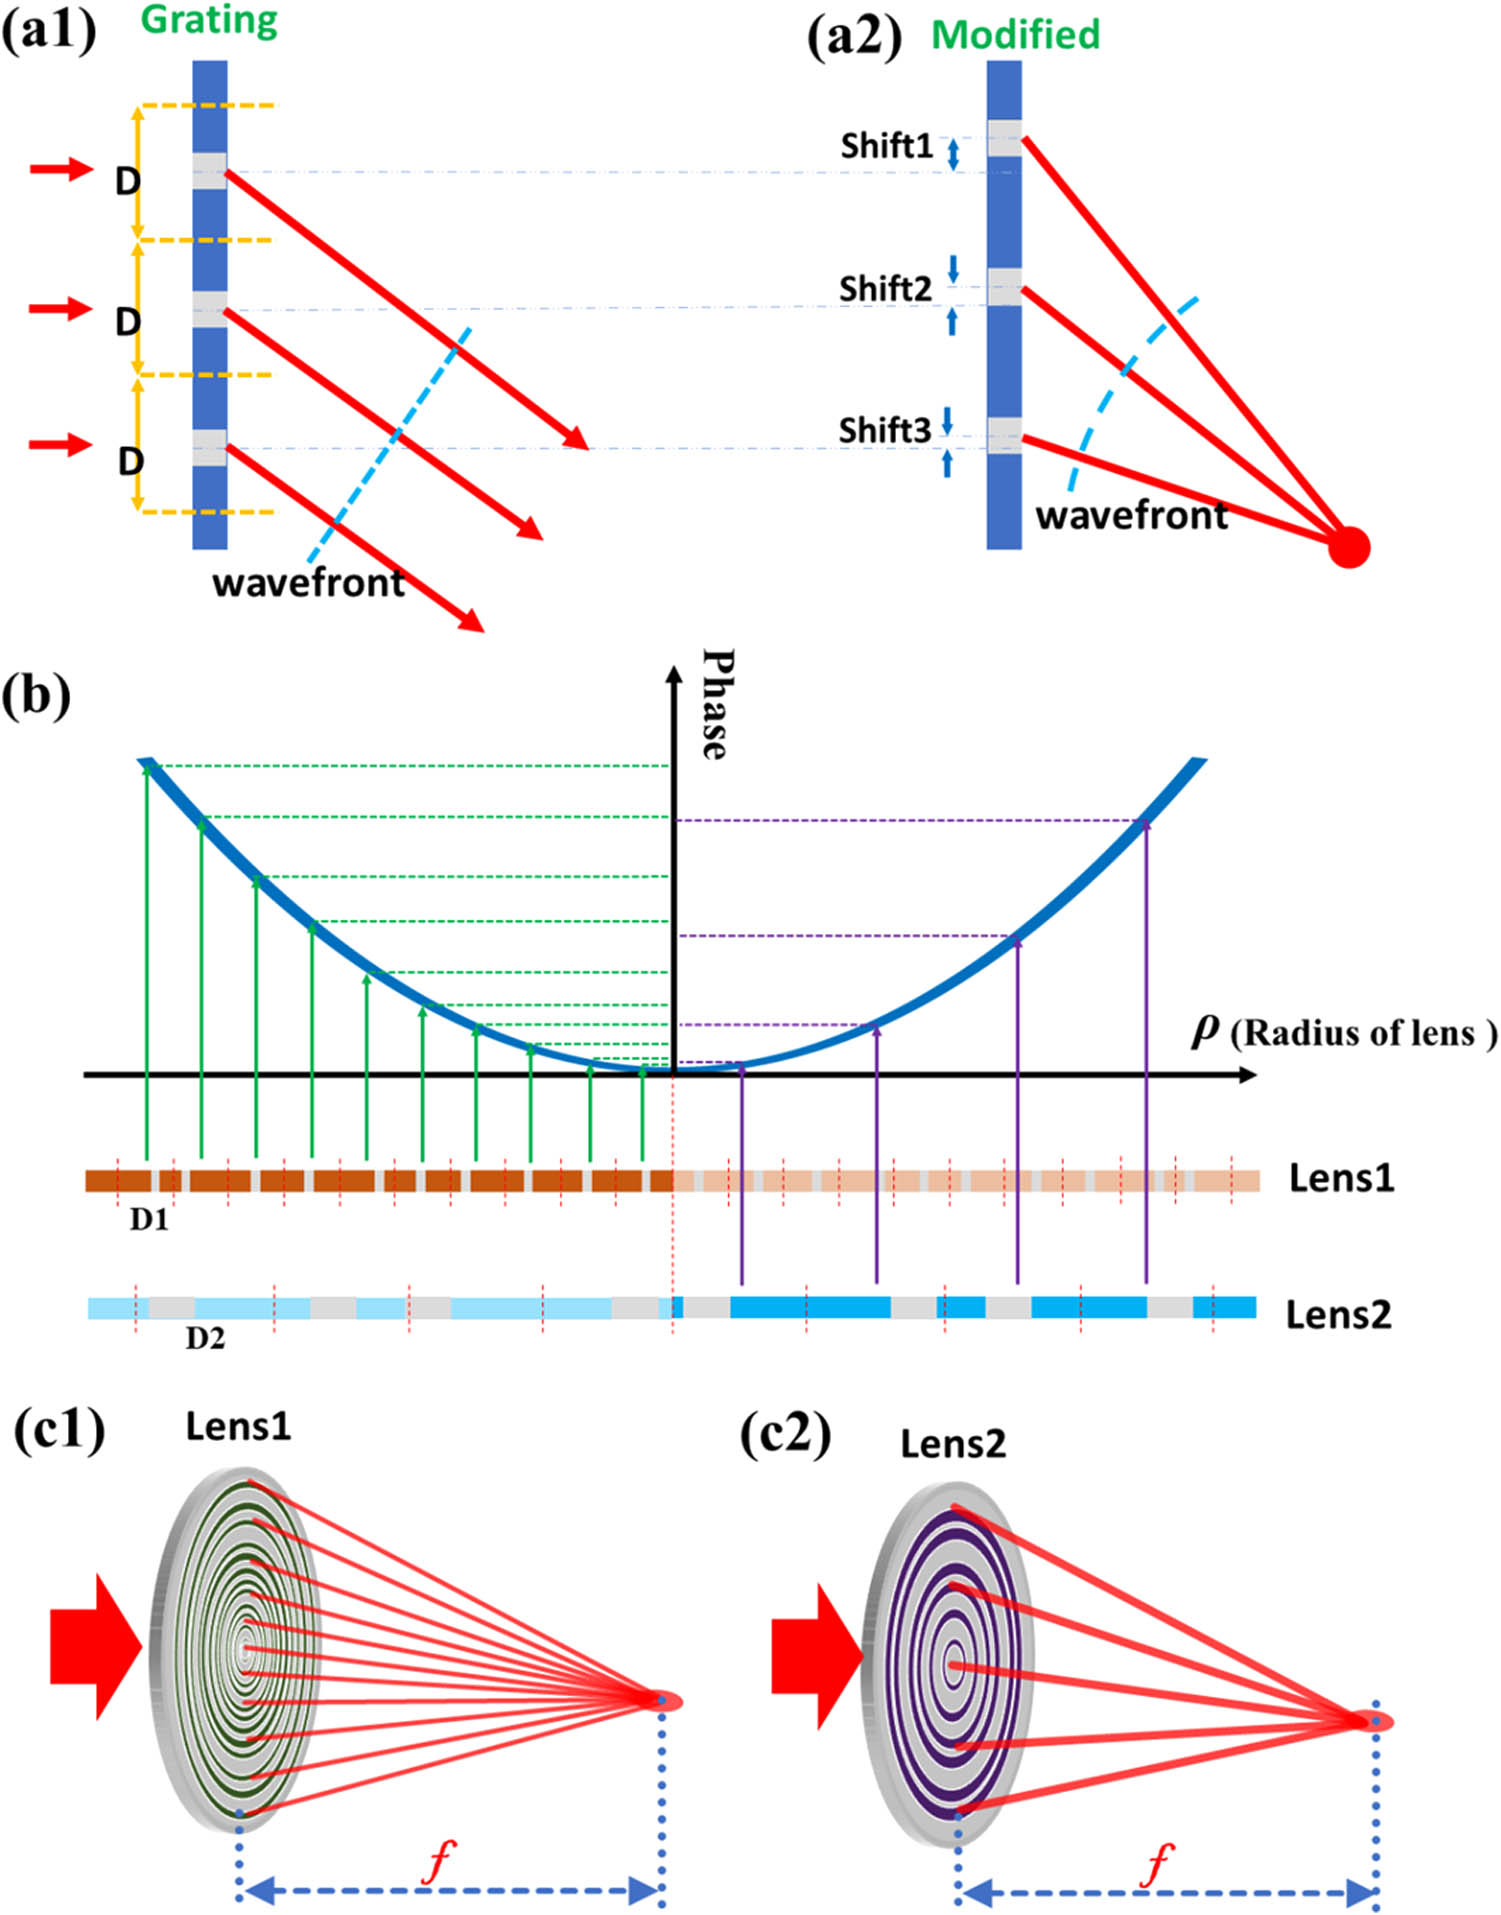 Flexible lens design based on detour phase holography. (a) The principle of detour phase holography. (a1) Each slit in an infinite one-dimensional grating with periodically repeating apertures of period D acts as a quasi-point-source from which light propagates in all directions. First-order diffraction rays leaving adjacent grating apertures have a path difference of one wavelength; this wavefront is known as a plane wave. (a2) For a converging planar lens, a line-structure is designed to shape the wavefront as an off-axis converging wavefront. (b) Phase distribution along the radial direction of a converging lens. If one aperture of the grating is imperfectly located, the wavefront from the first diffraction order will be deformed. This is undesirable for an ordinary diffraction grating, but it provides a simple way to modify the relative phase value point by point of the first-order diffraction field to form the desired wavefront. (c) Schematic diagram of the flexible lens design. Detour phase holography lenses with the same focal length but different annular parameters (c1) and (c2) could be designed for different applications and fabrication capabilities.